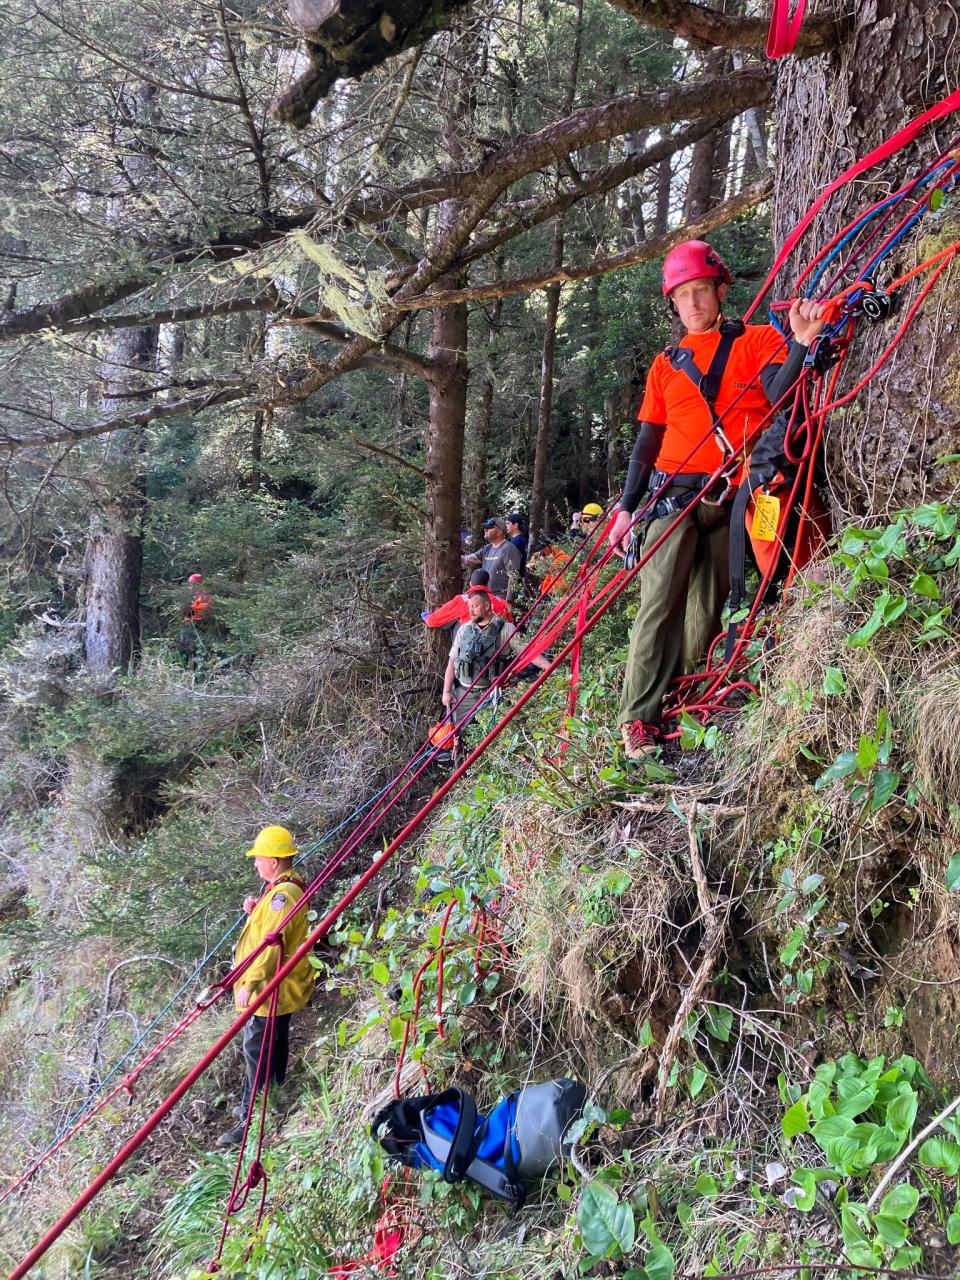 Rescue teams used ropes to rescue the children who fell April 22 from a cliff  at Boardman Corridor north of Brookings on Oregon's south coast.